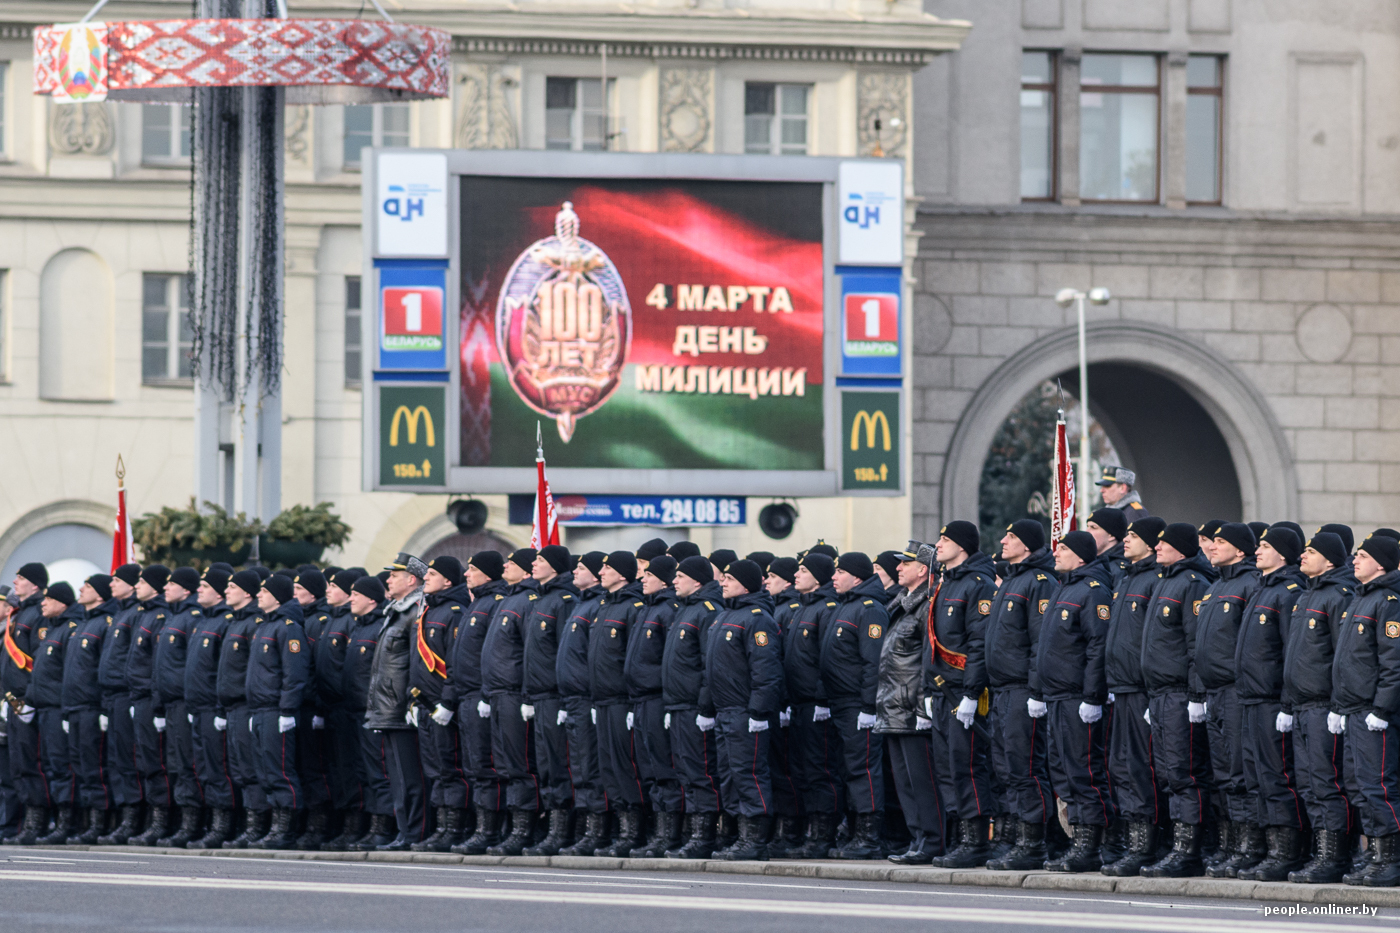 Belarusian authorities weaken pressure on business, but gloss over security forces pressure on opposition